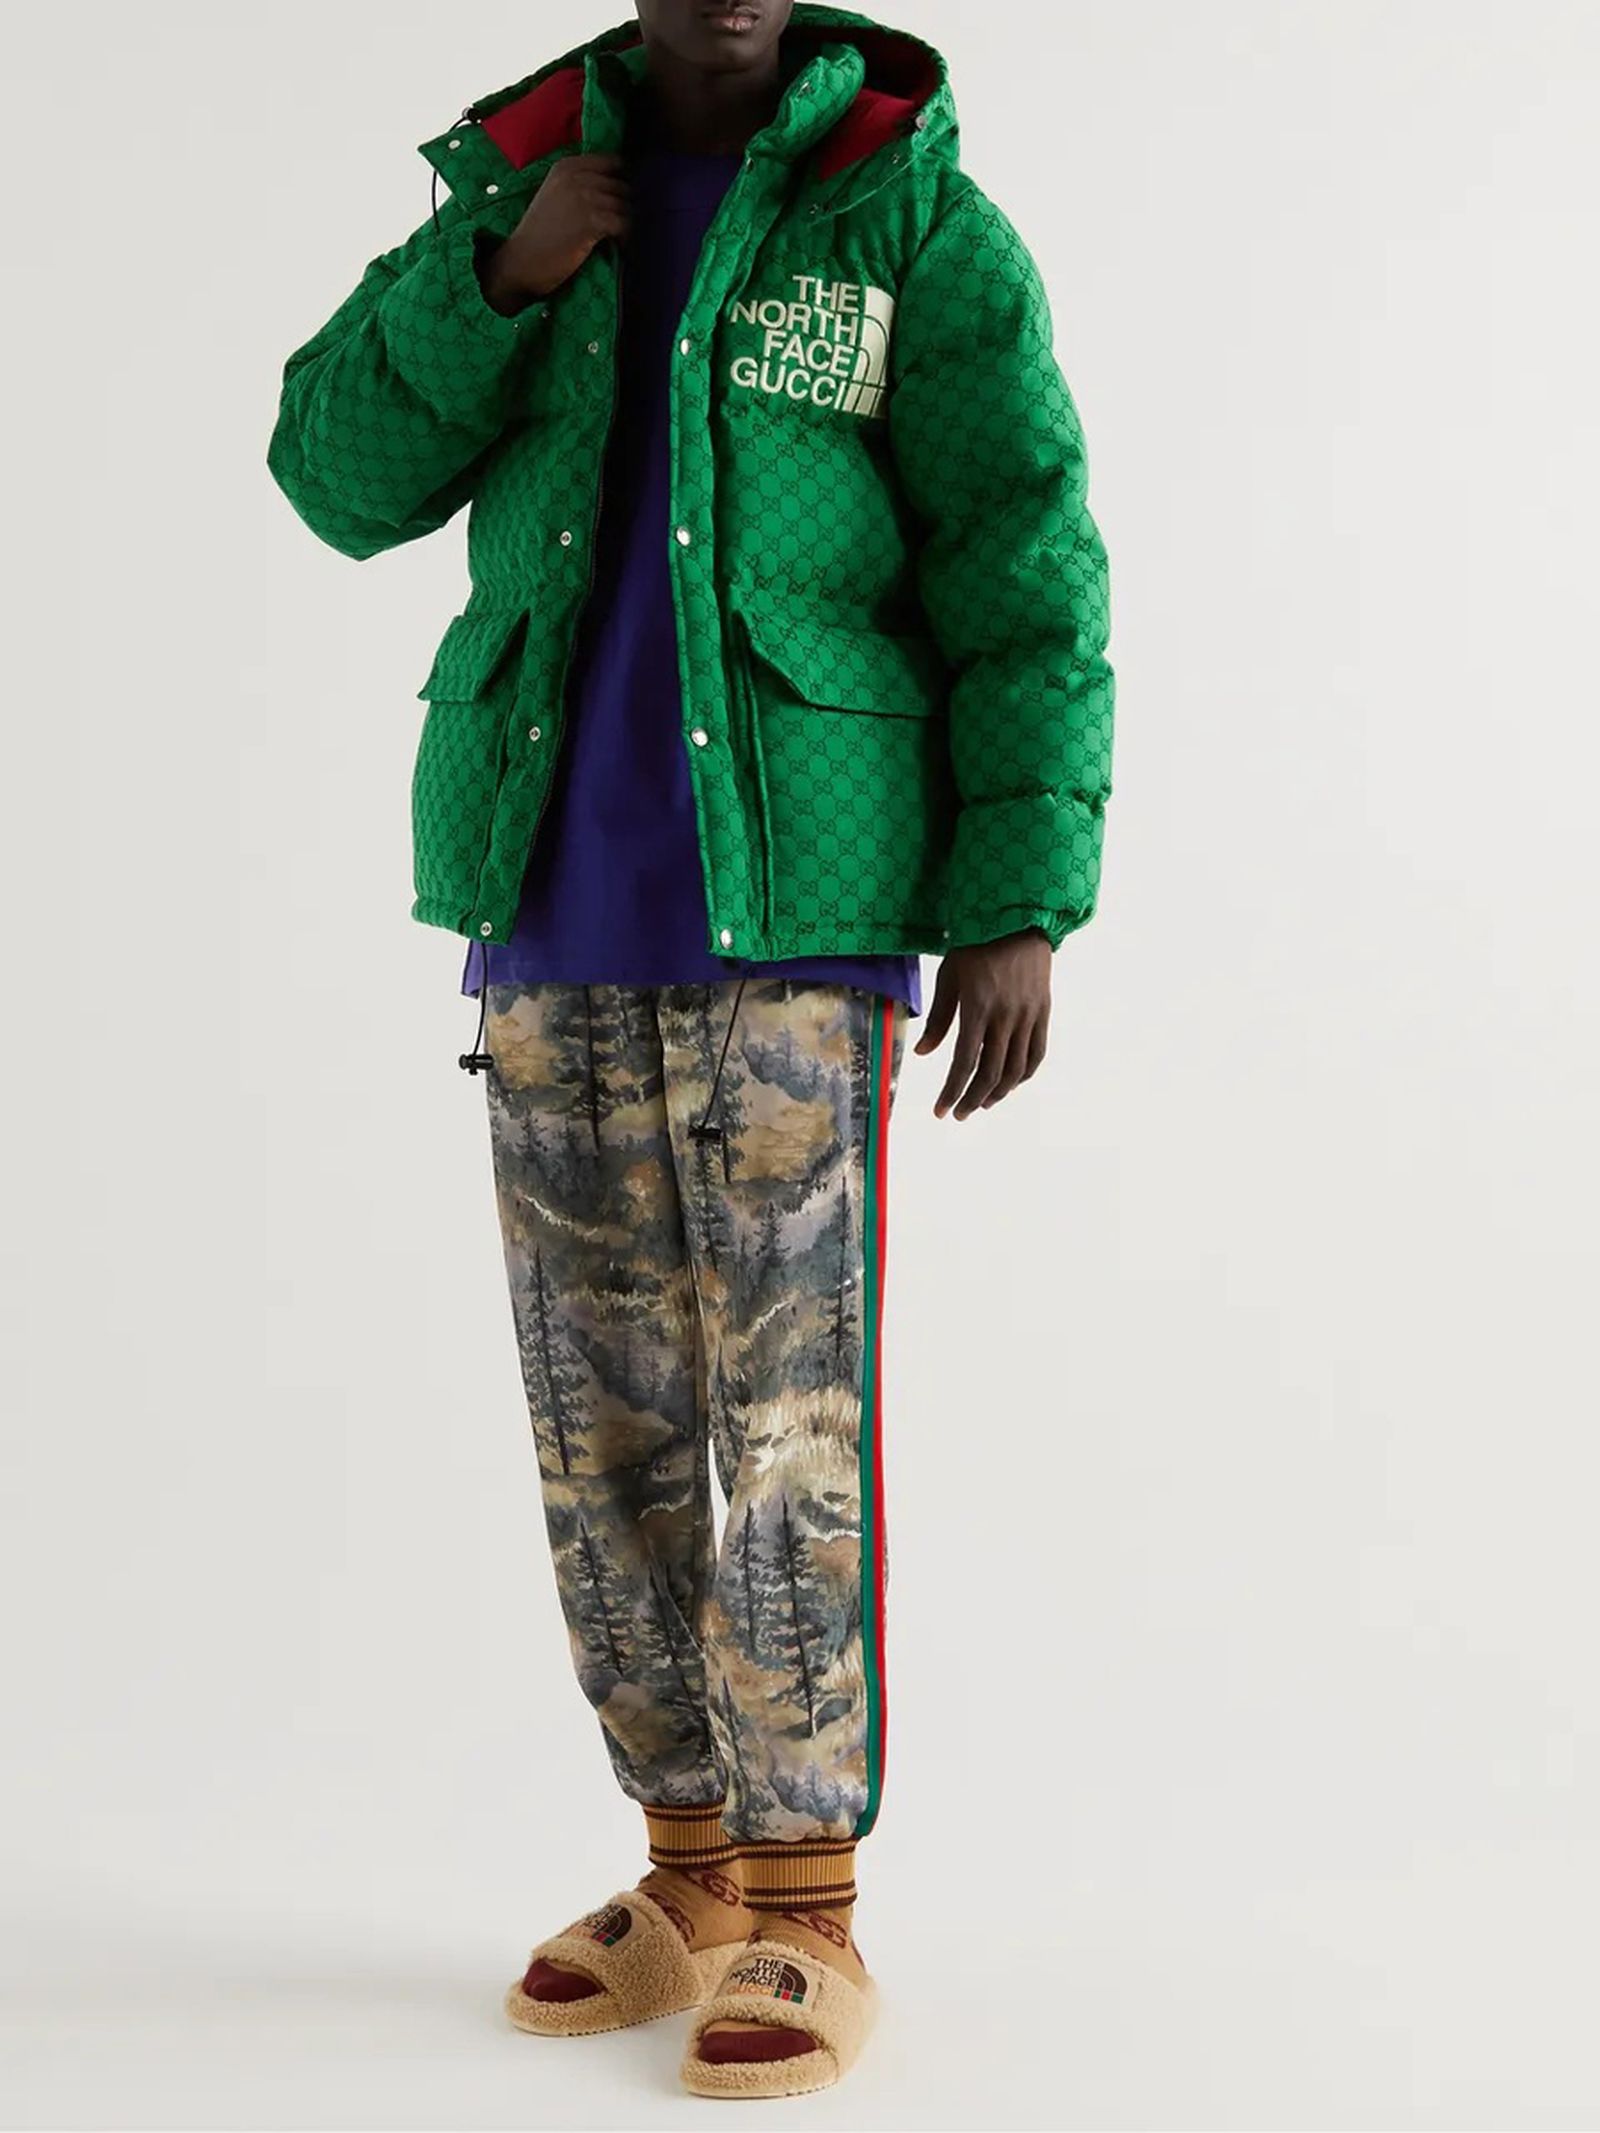 Gucci & The North Face FW21 Collaboration: to Buy